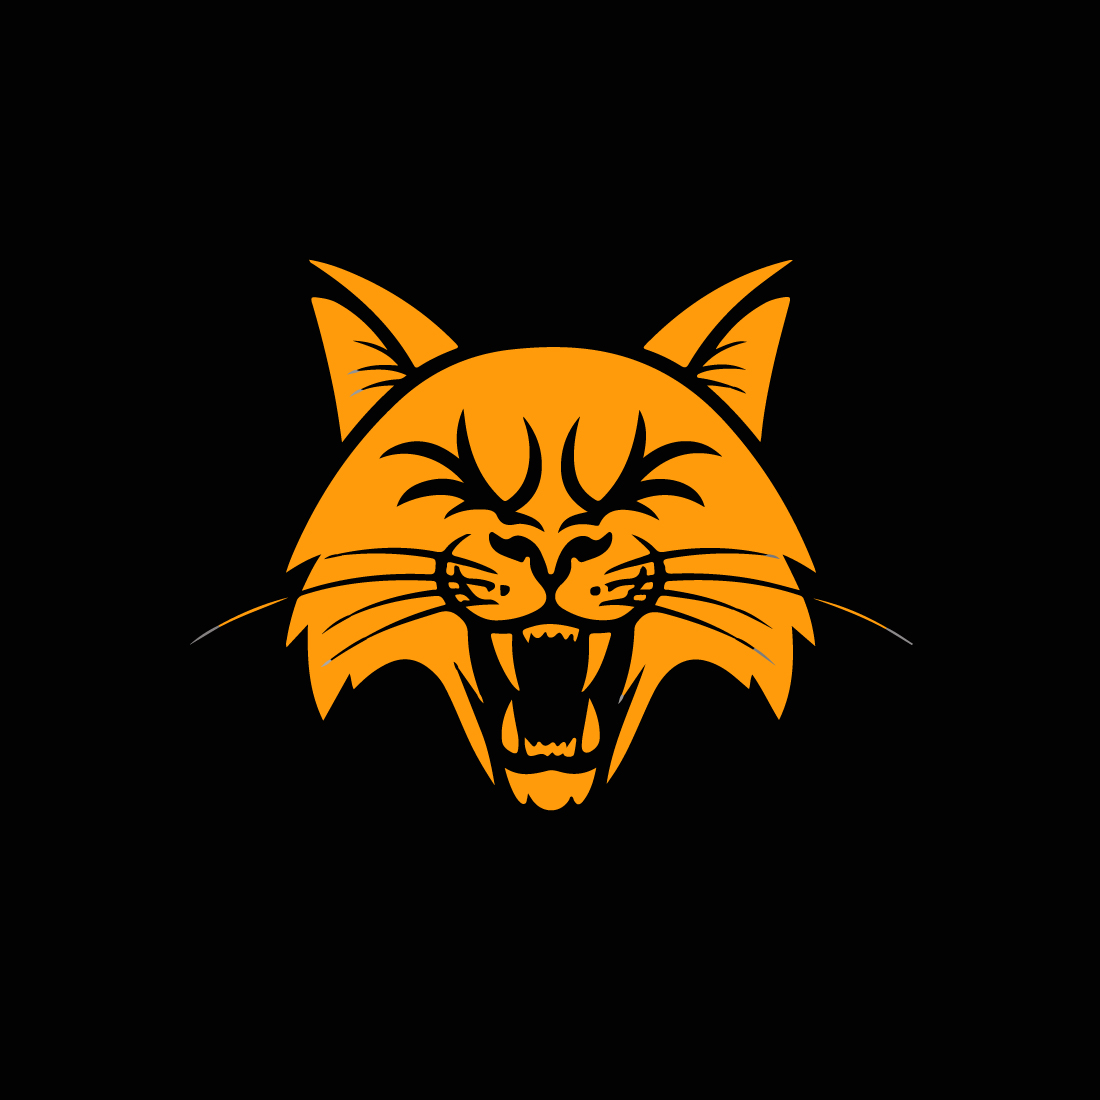 Head of cat Logo cover image.